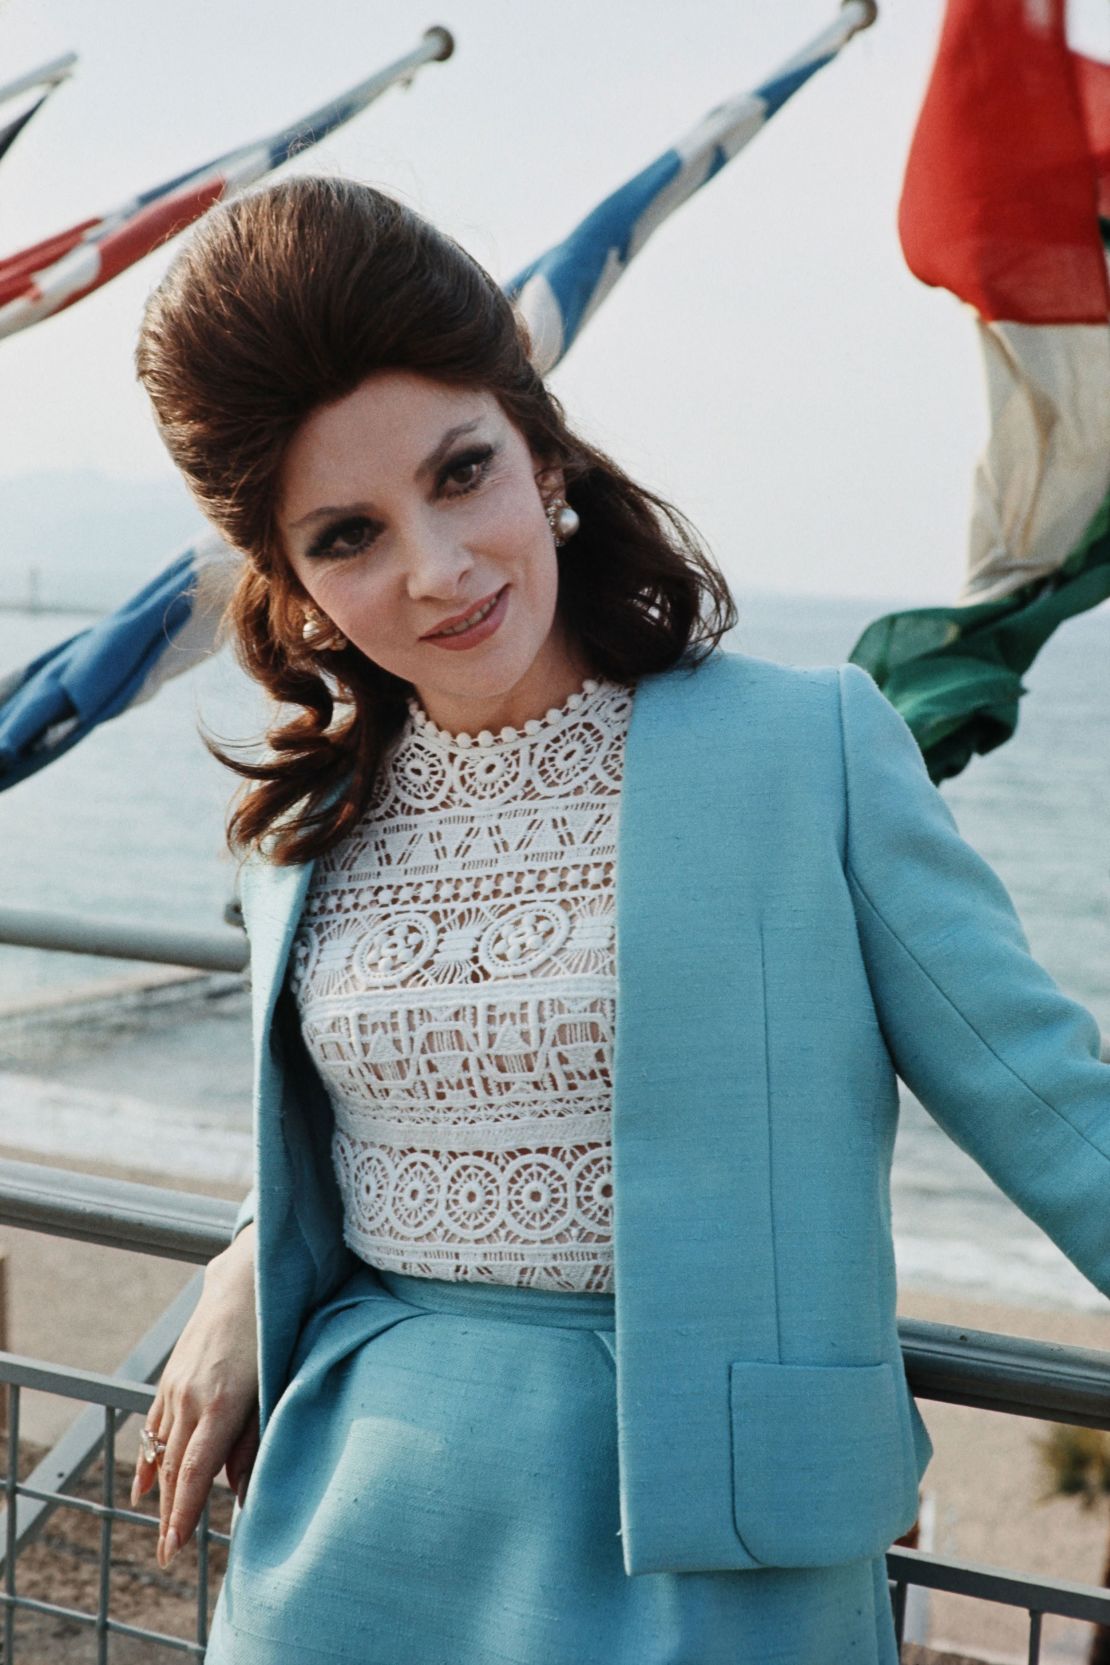 Italian actress Gina Lollobrigida contrasts a demure powder blue suit with racy lace on top at Cannes in 1972. 